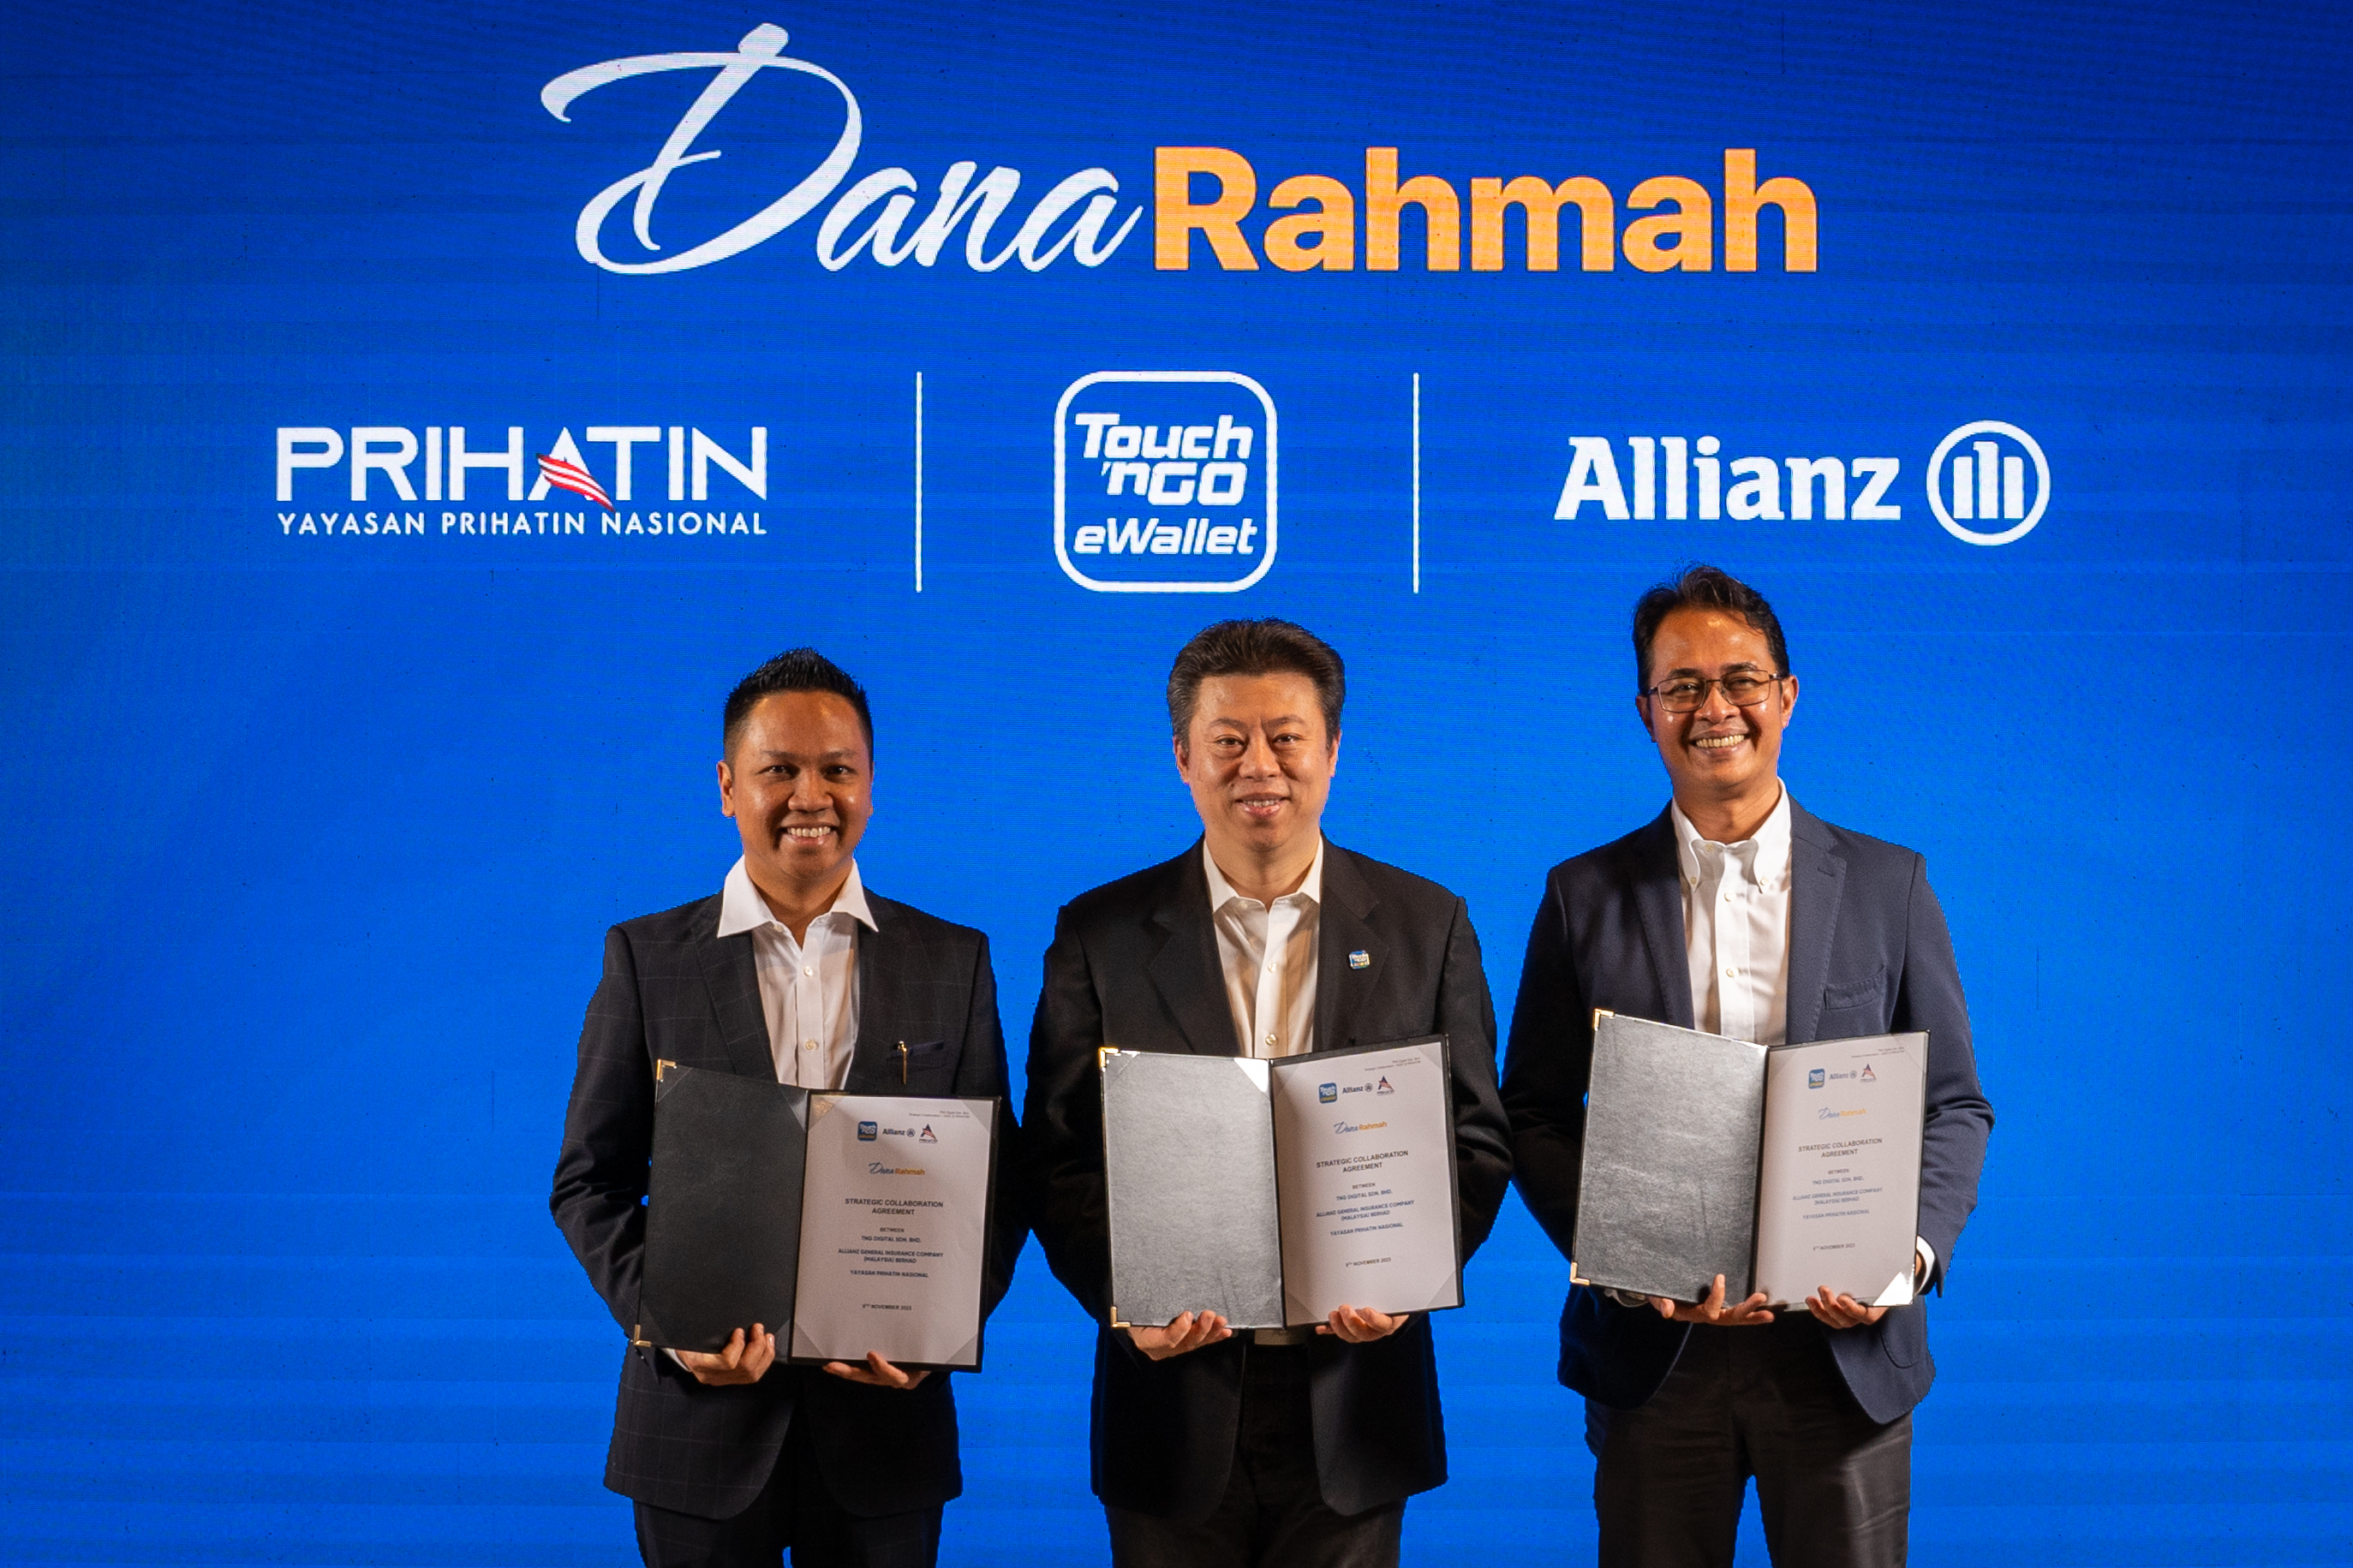 TNG Digital Sdn. Bhd., Allianz General Insurance Company Berhad, and Yayasan Prihatin Nasional join forces to empower the B40 communities with insurance protection